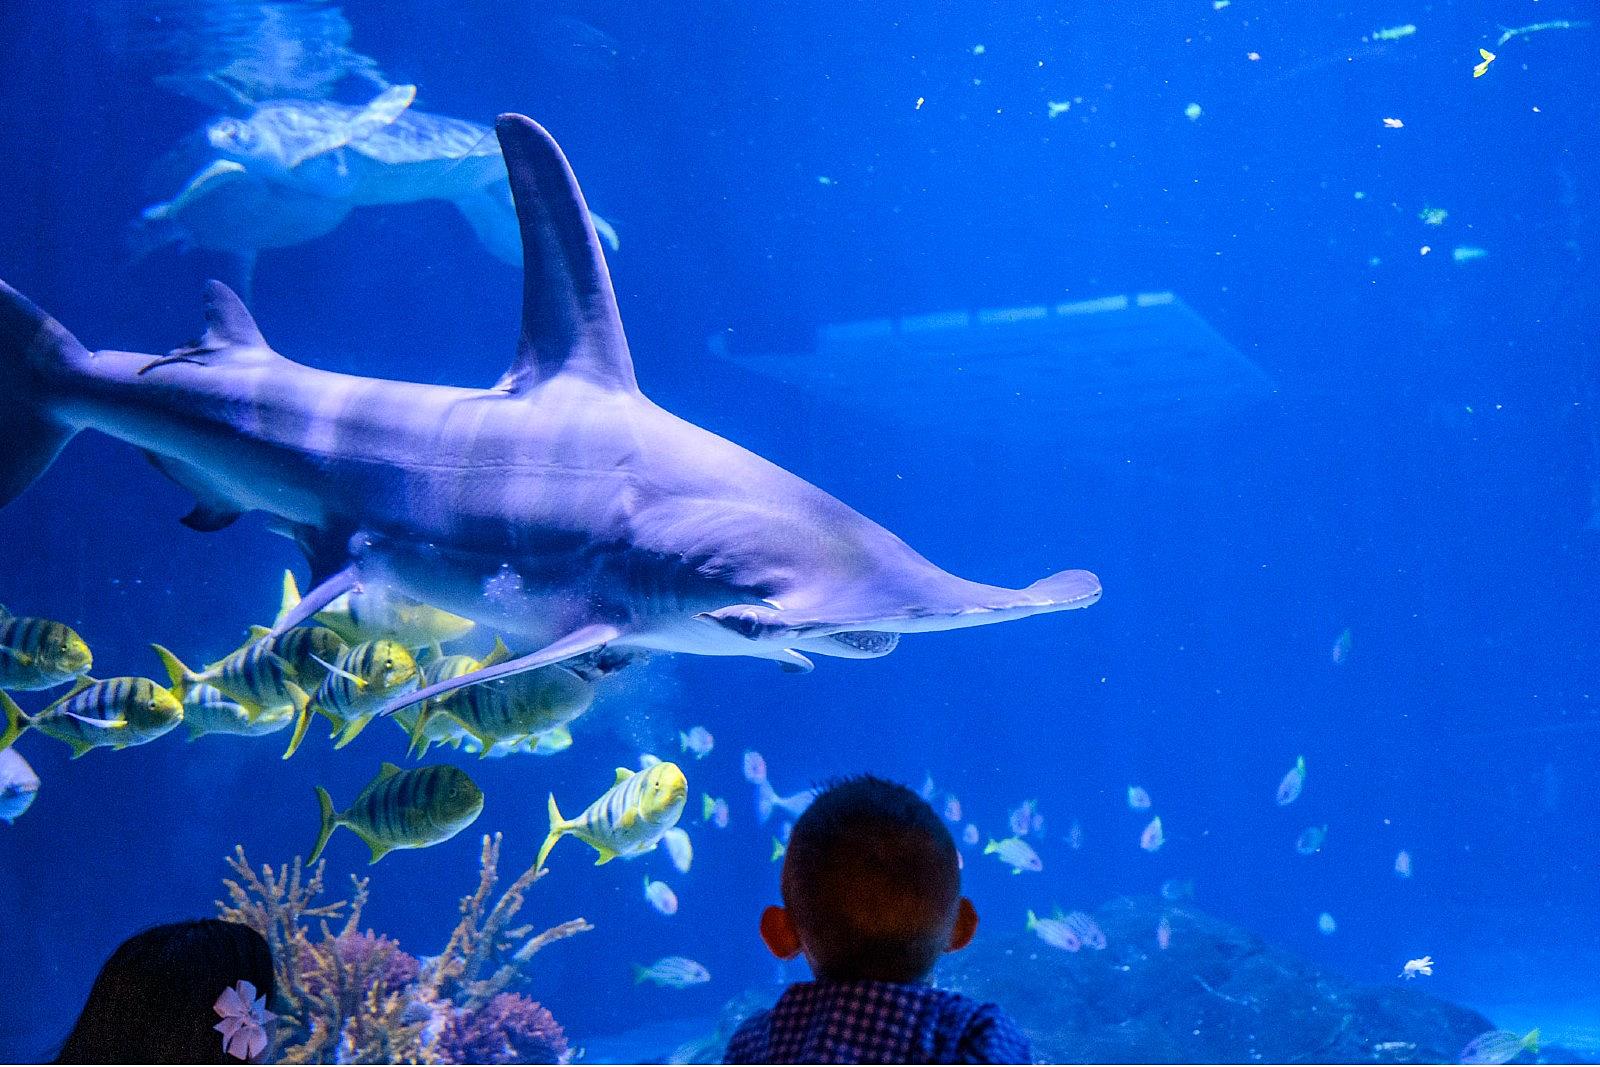 This NJ aquarium was named one of the best in the country